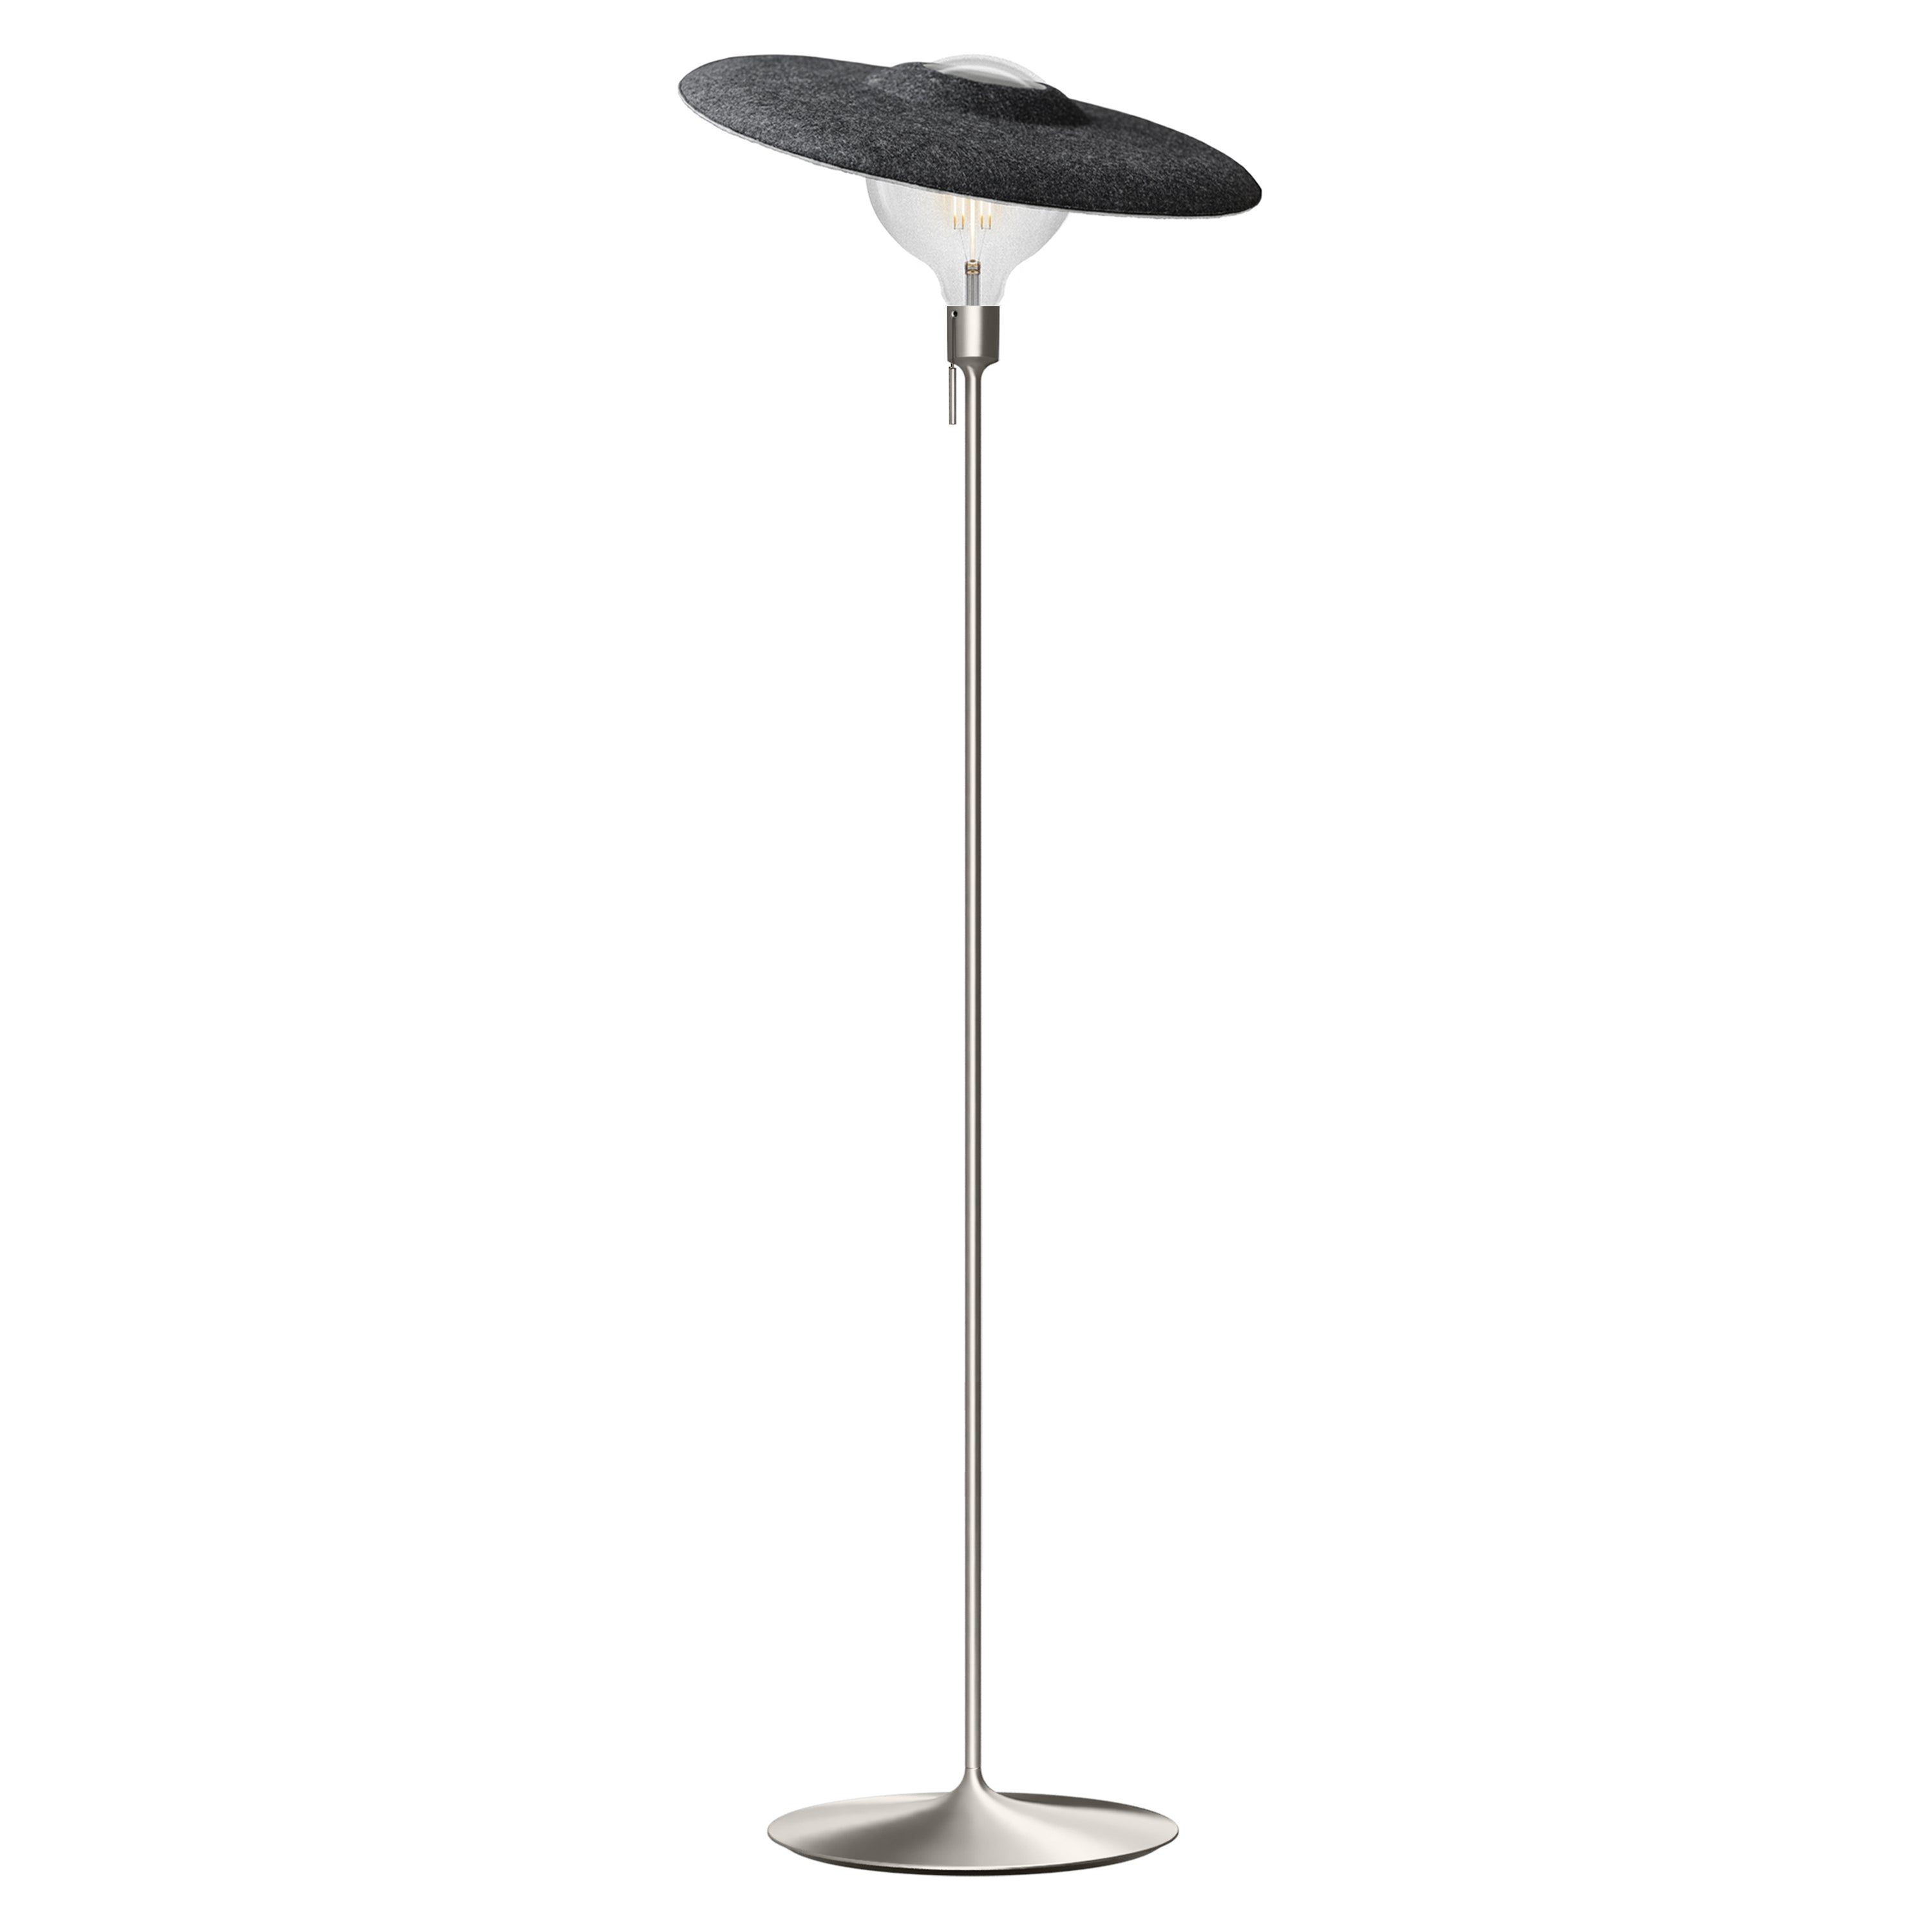 Shade Champagne Floor Lamp: Brushed Steel + With Bulb (3 W)